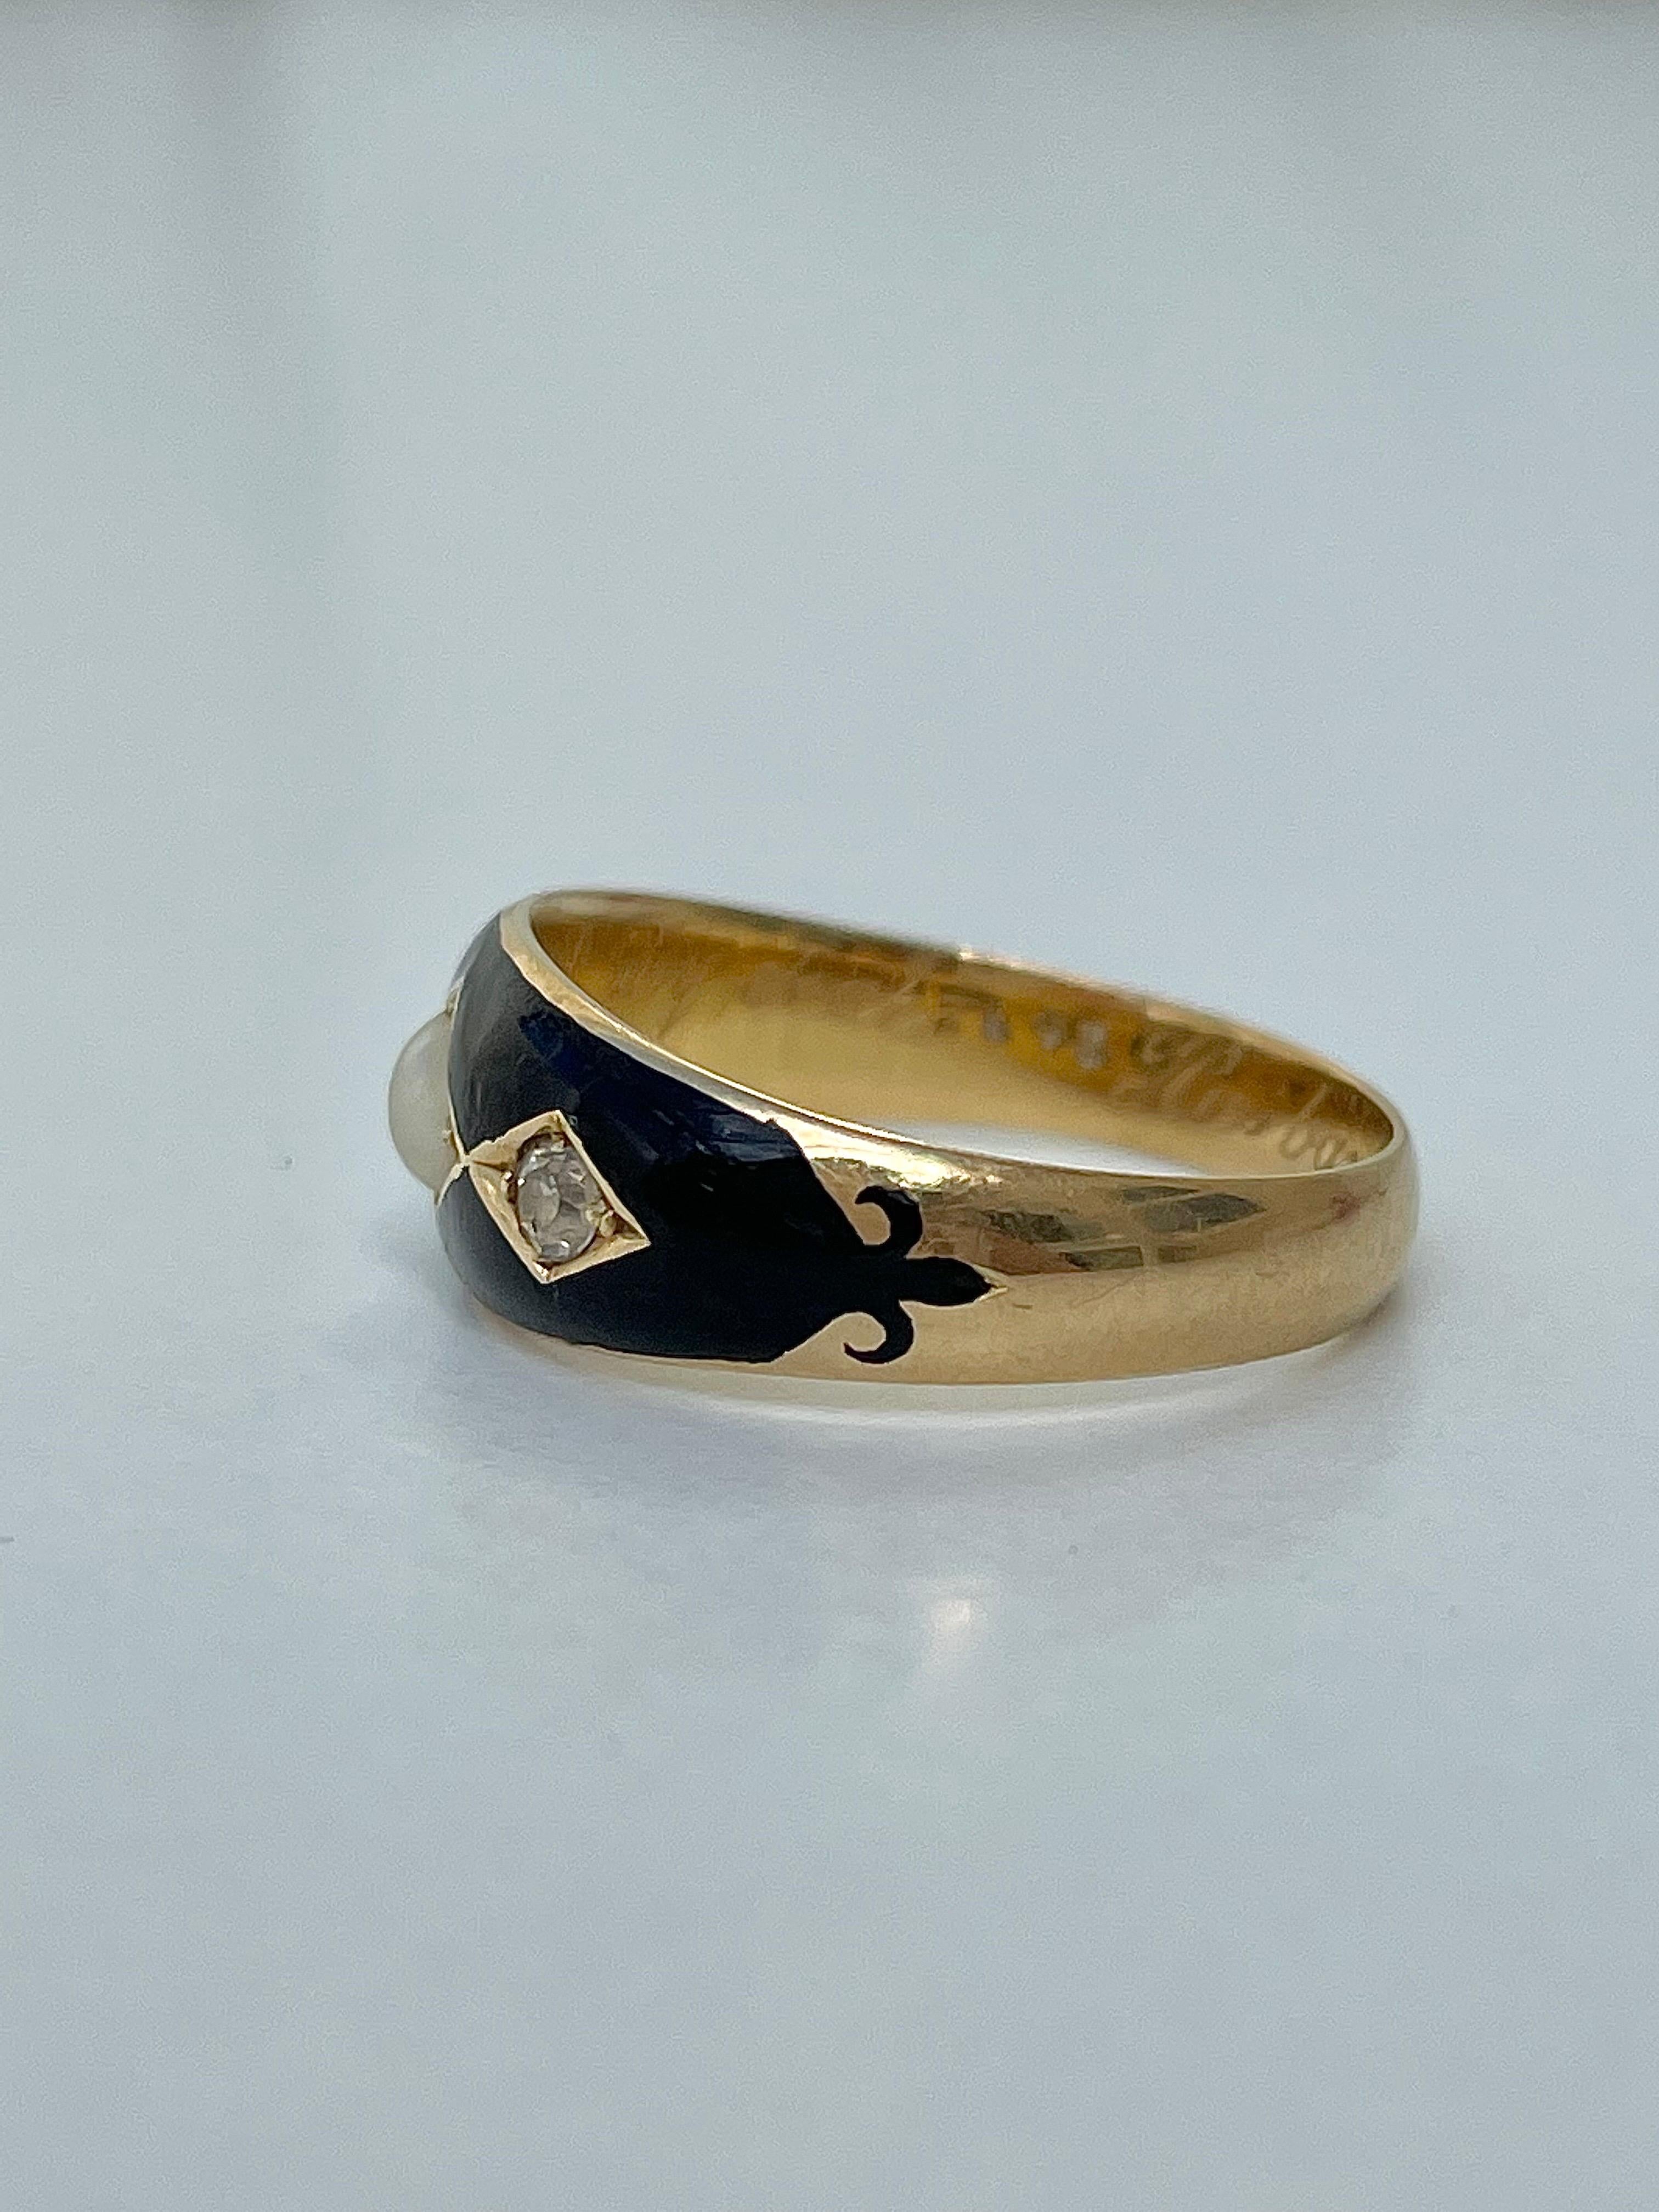 Antique Black Enamel Diamond & Pearl 3 Stone Ring in 18ct Yellow Gold

inscription “in memory of my dearest husband 23/4/10”

beautiful enamel ring


The item comes without the box in the photos but will be presented in a gift box

Measurements: